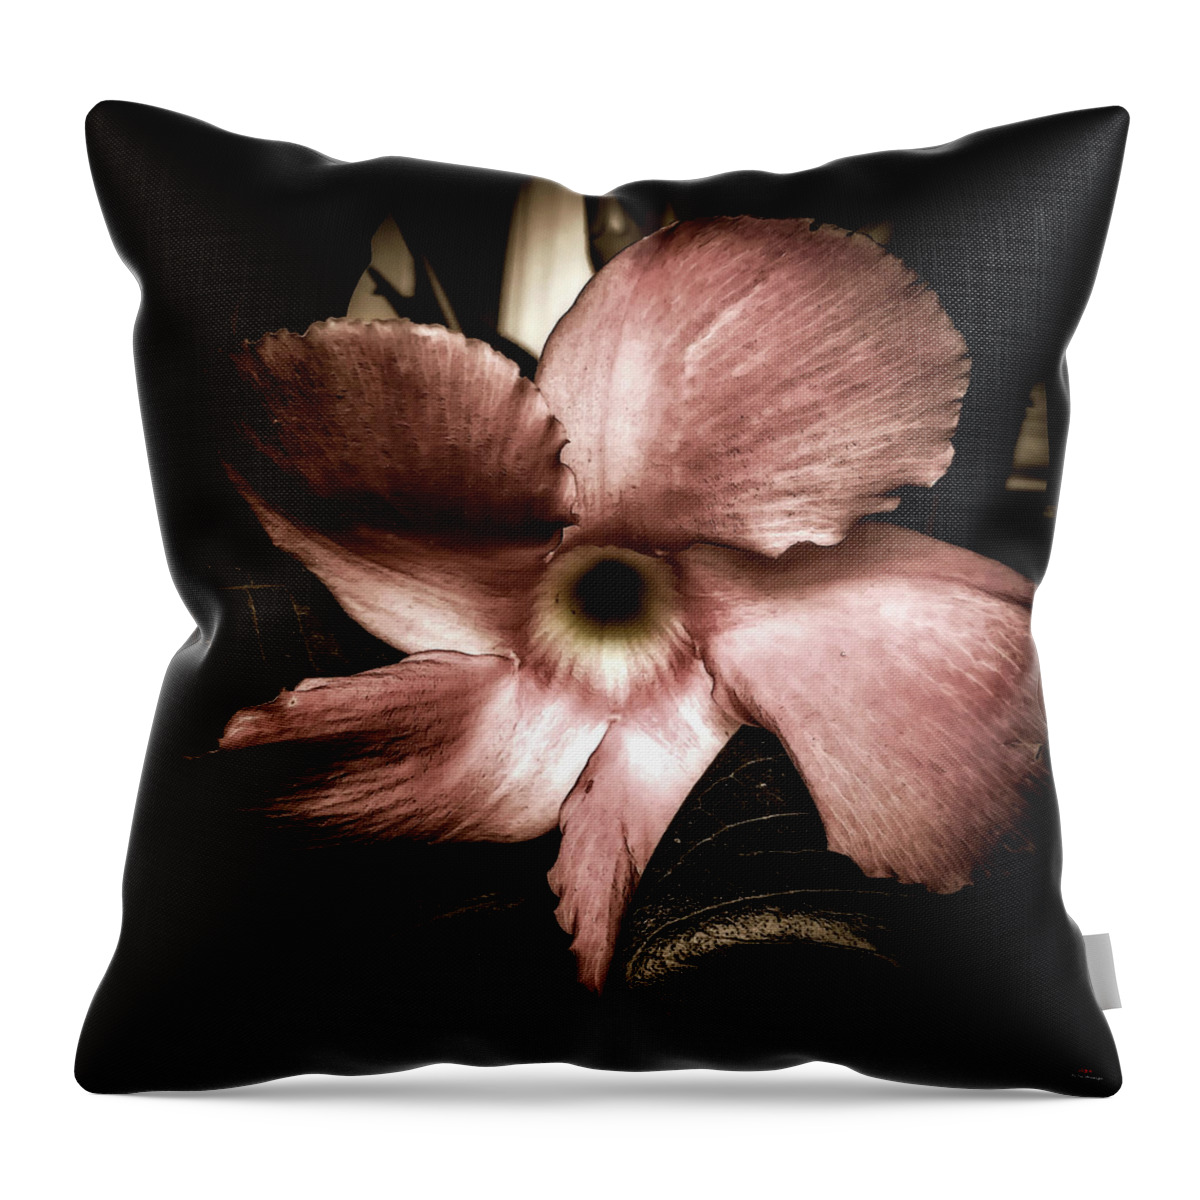  Throw Pillow featuring the photograph Looking around-278 by Emilio Arostegui